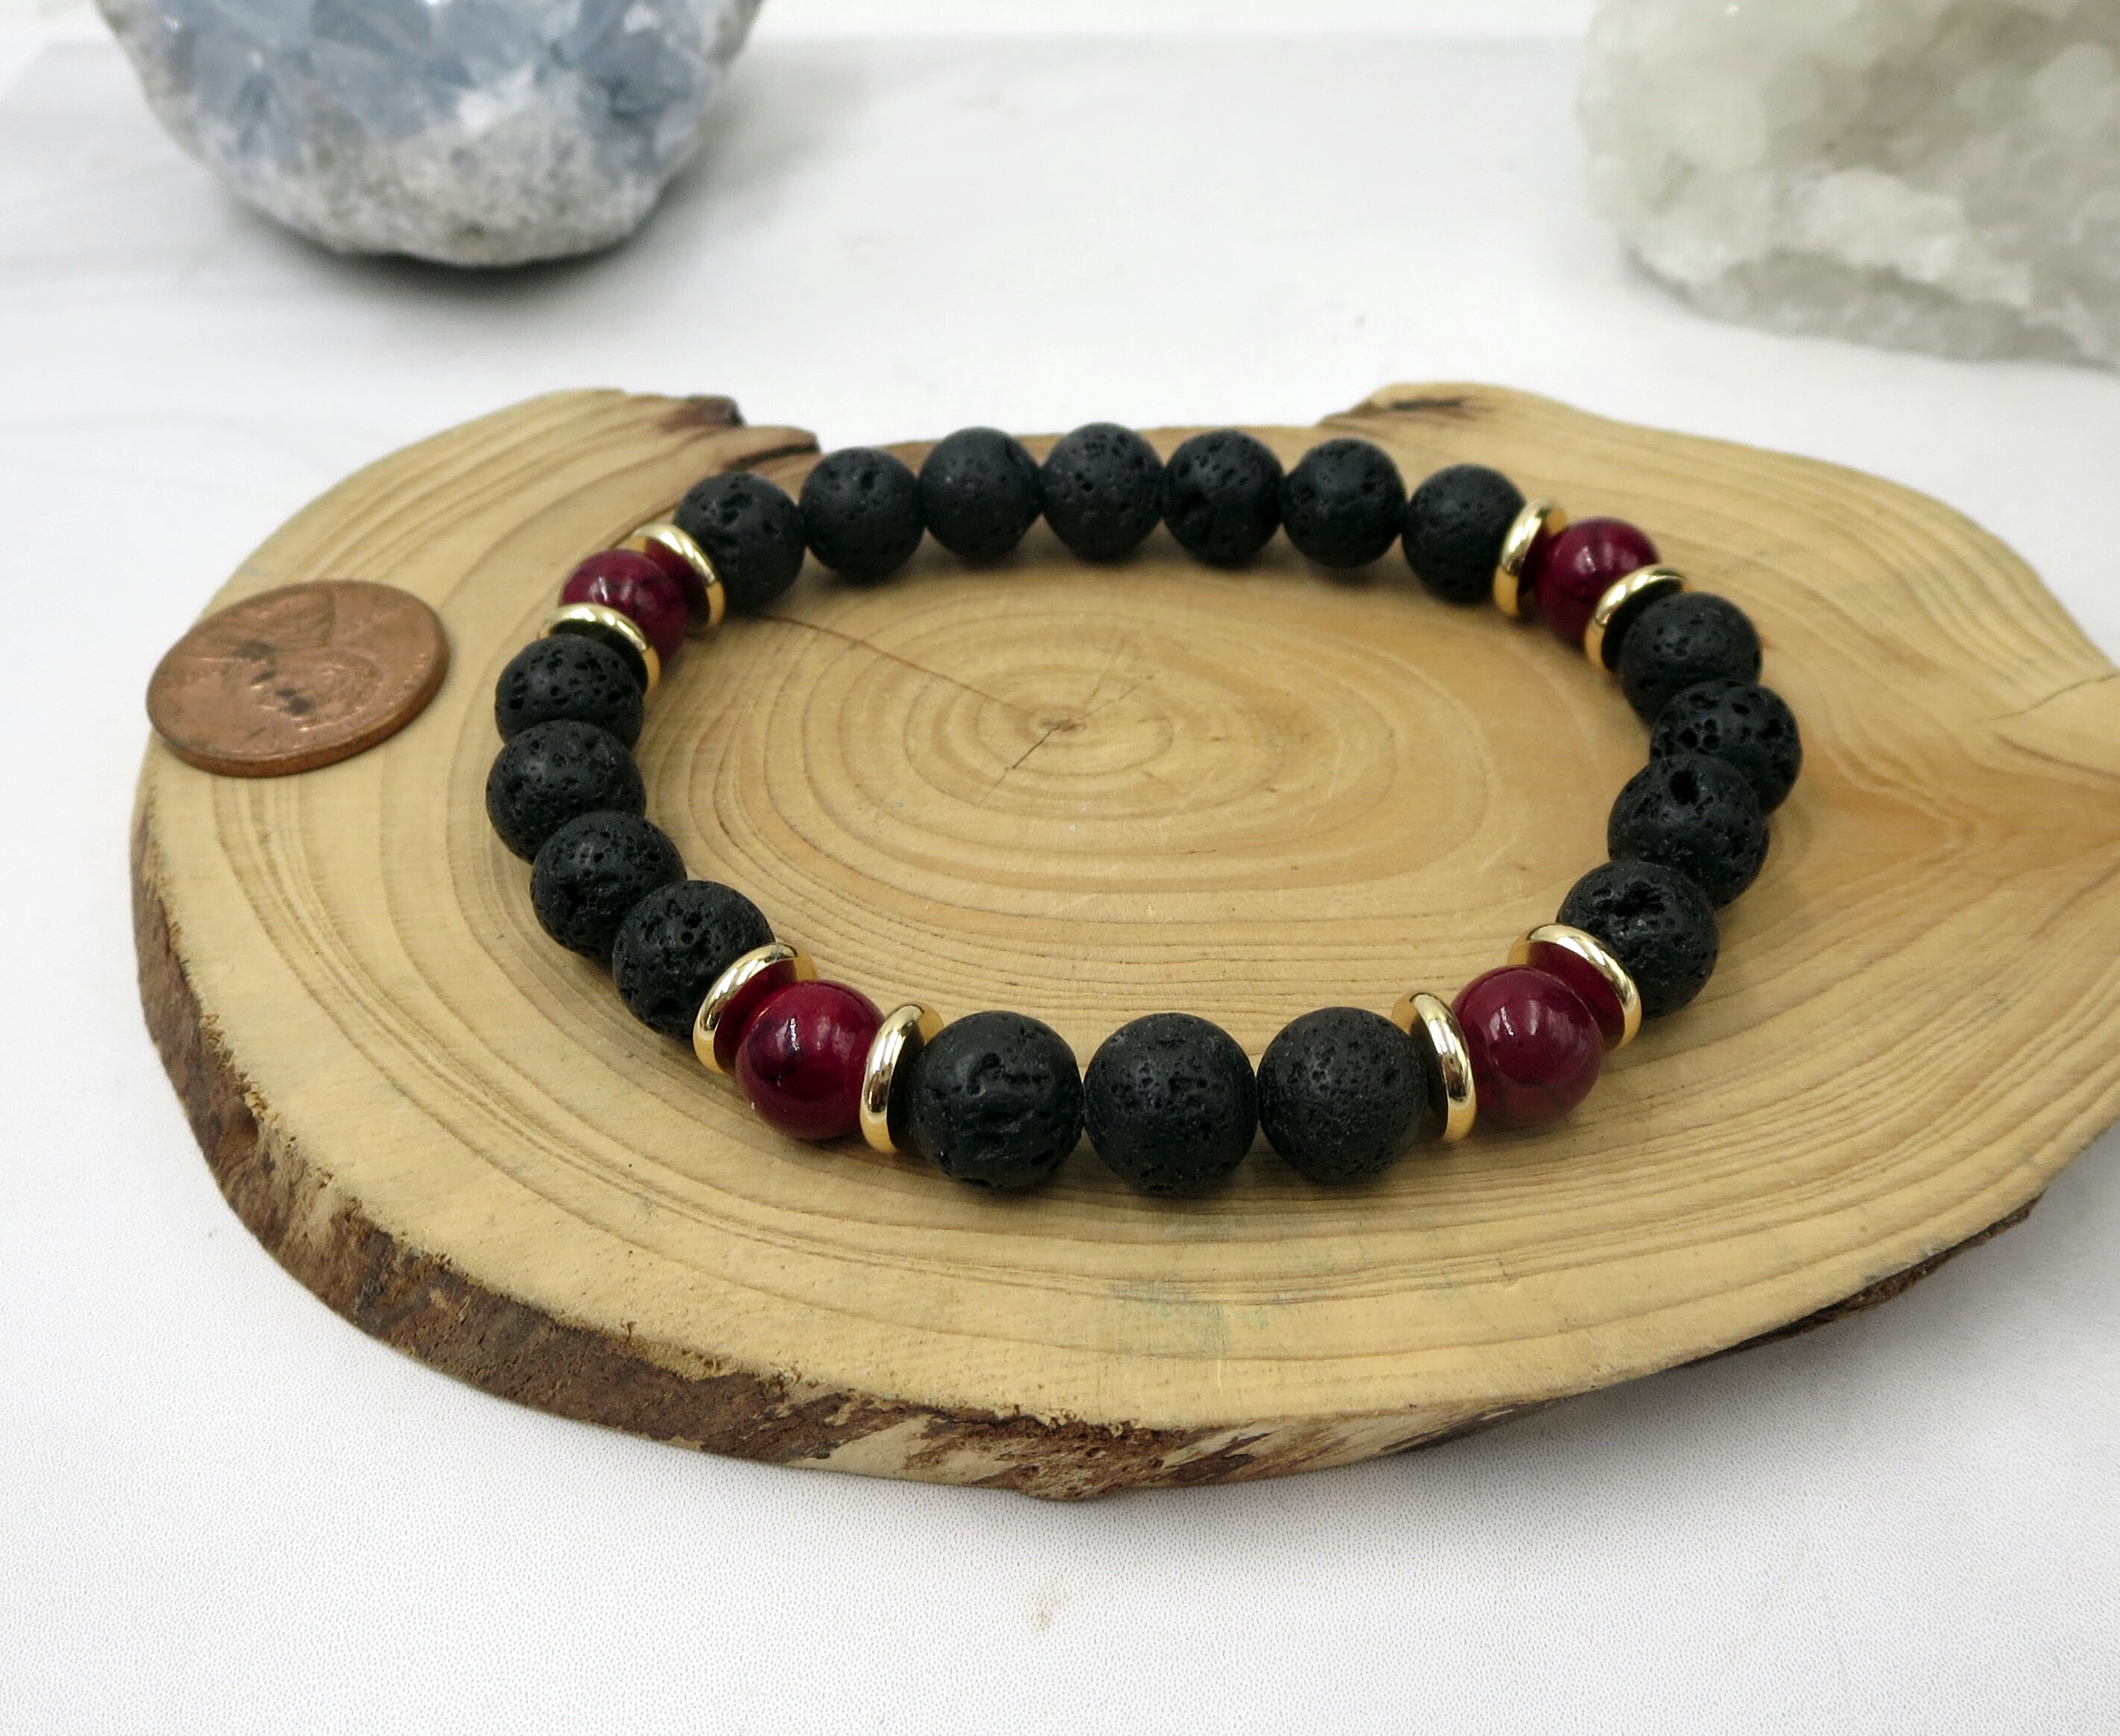 Black and Red Natural Stone and African Recycled Glass Bead Bracelet Stack,  Set of Three Stretch Bracelets | Pebbles at my Feet